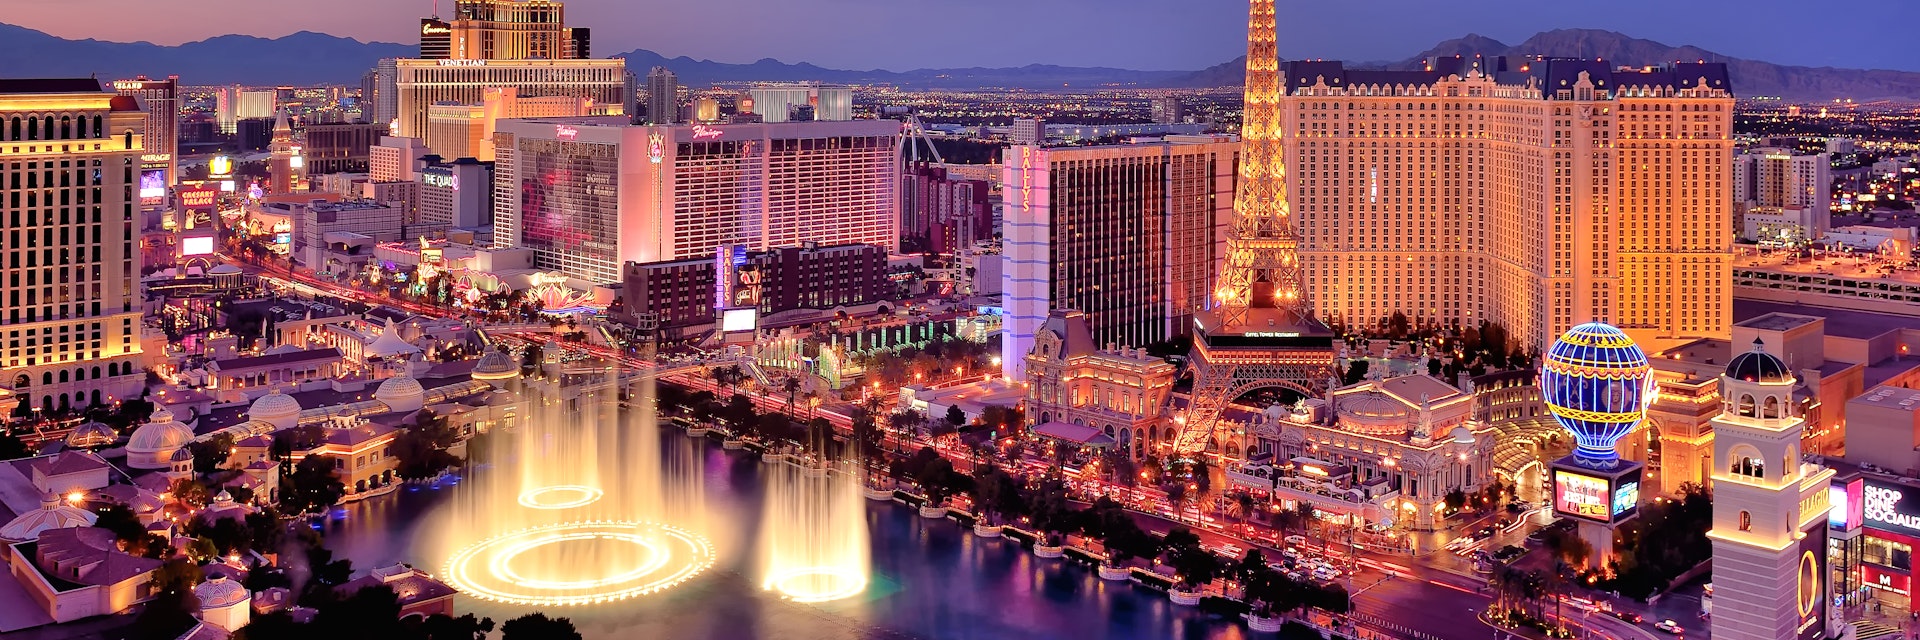 The Las Vegas strip with the fountains of the Bellagio leaping into the air photographed at dusk. 